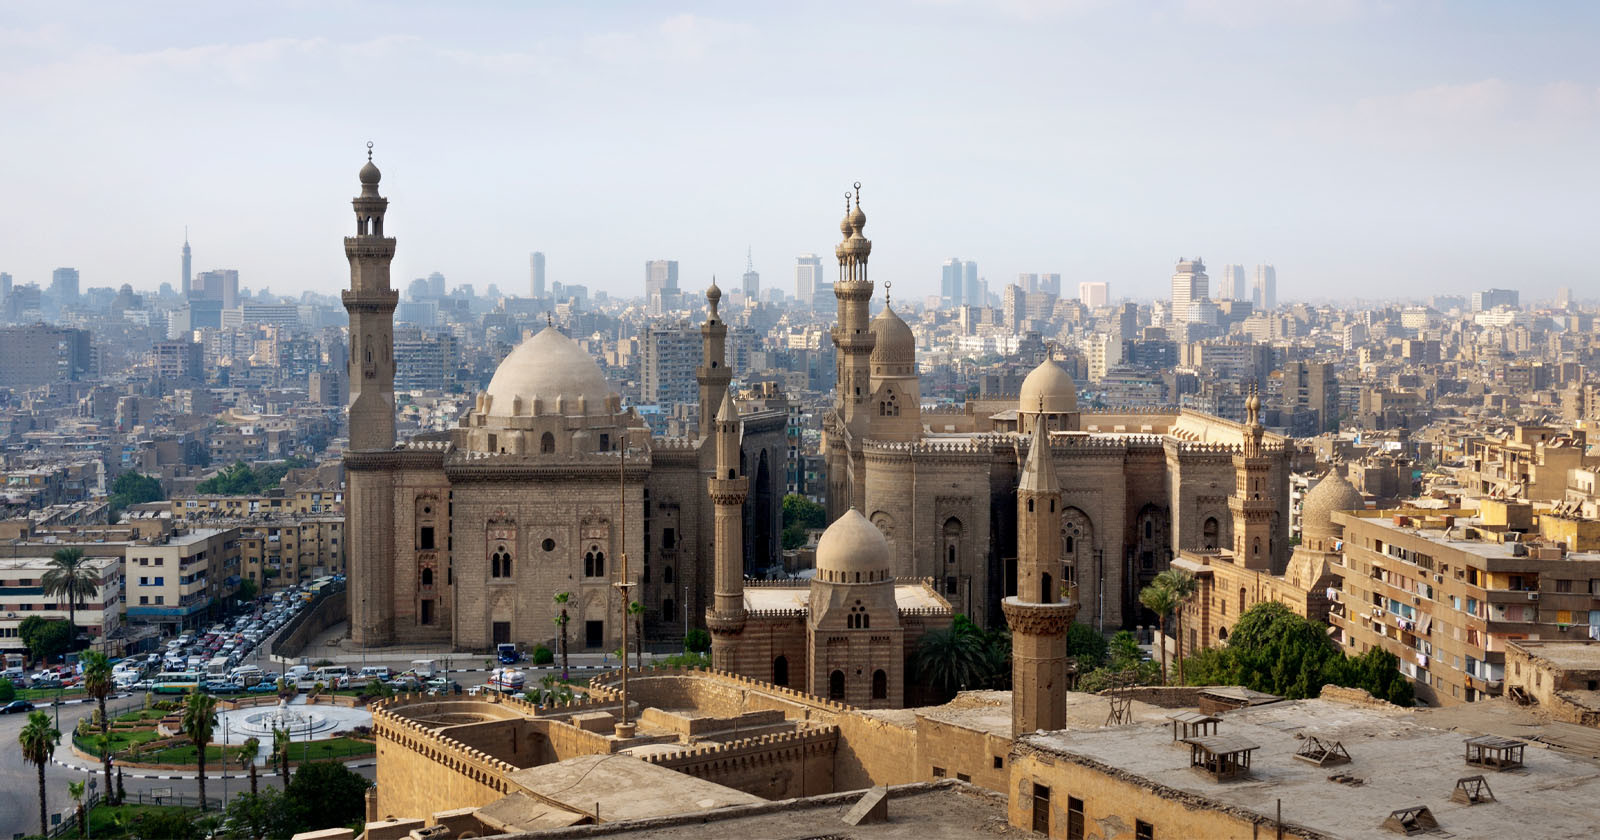  egypt ban photography offensive country 